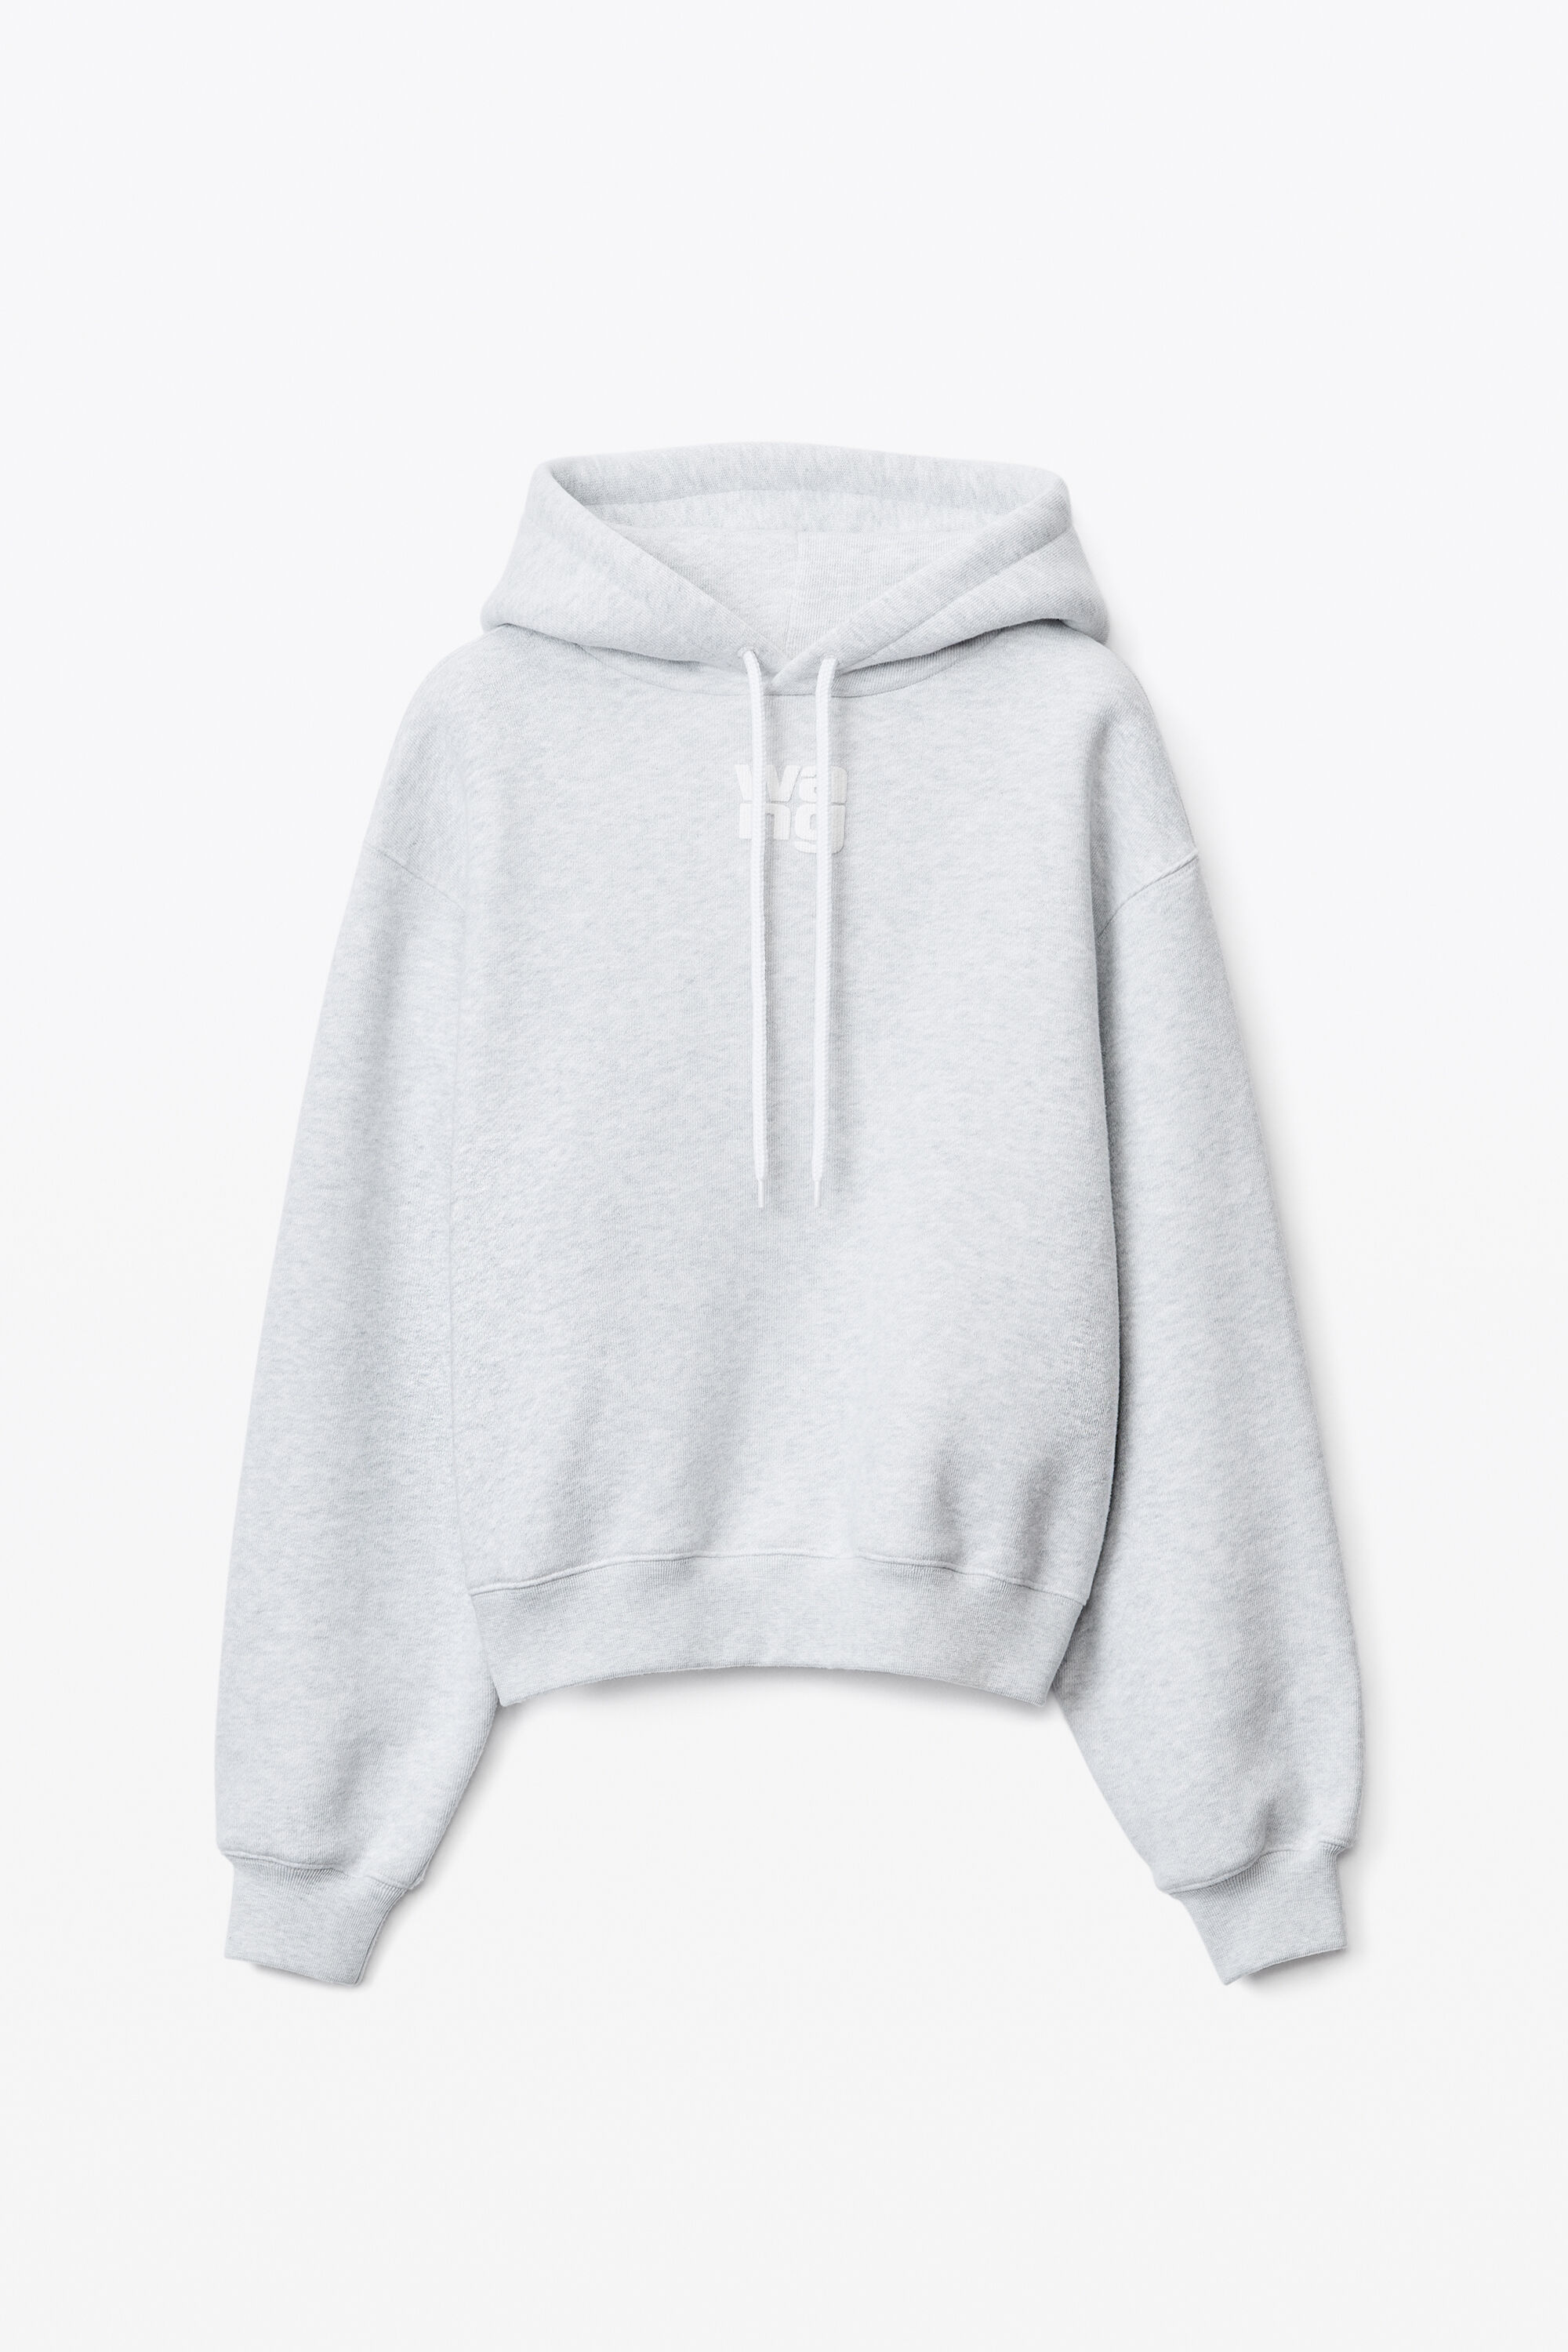 PUFF LOGO HOODIE IN STRUCTURED TERRY in LIGHT HEATHER GREY 